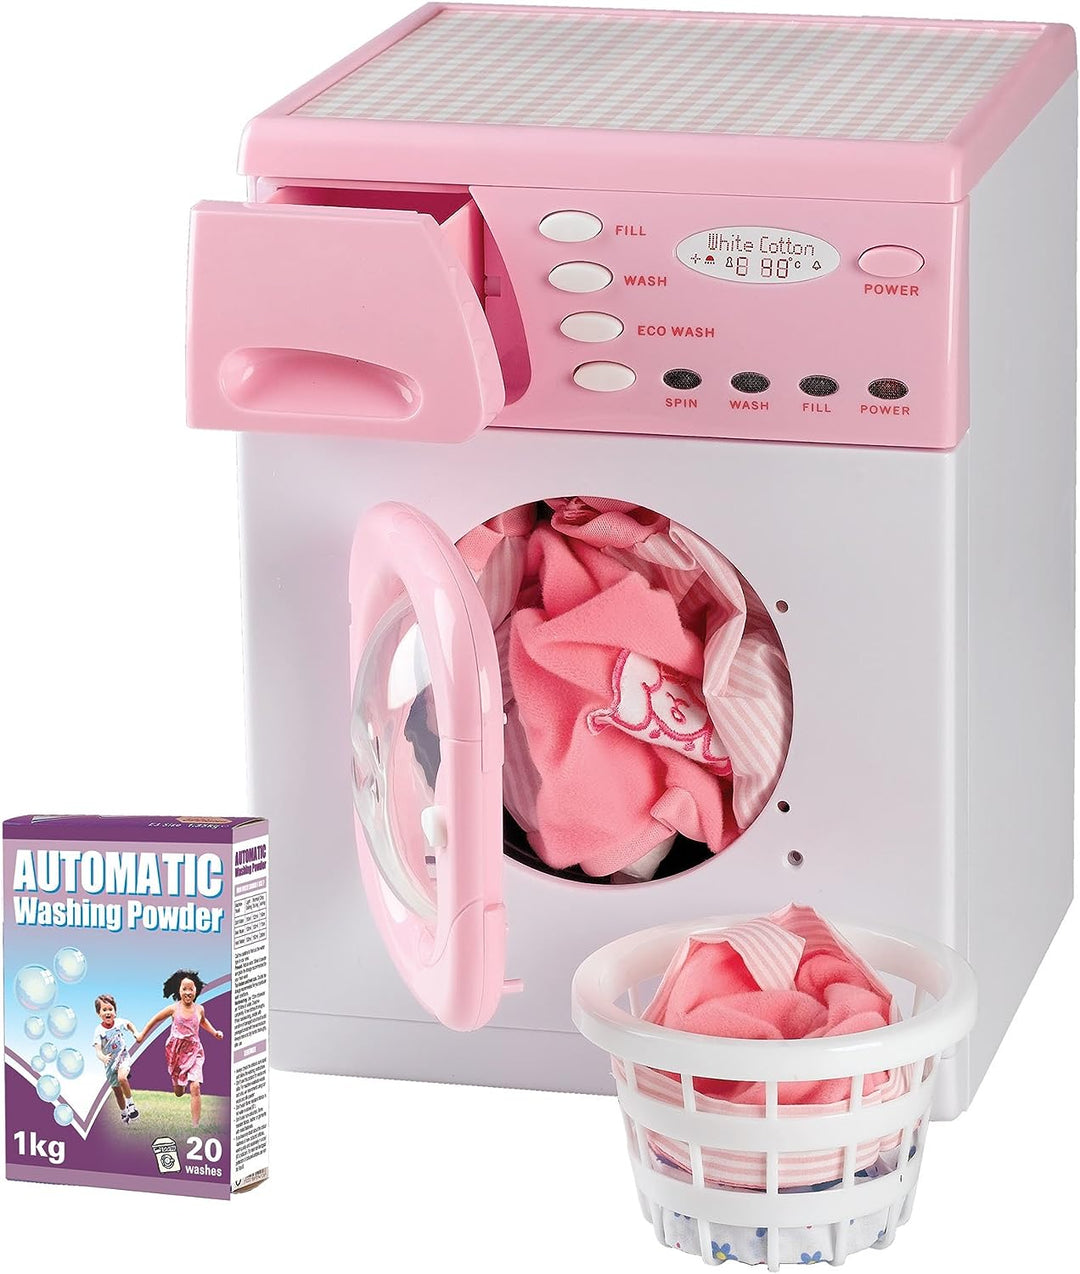 Casdon Pink Washer | Pink Toy Washing Machine For Children Aged 3+ | Features Spinning Drum & Sound Effects For Realistic Play!